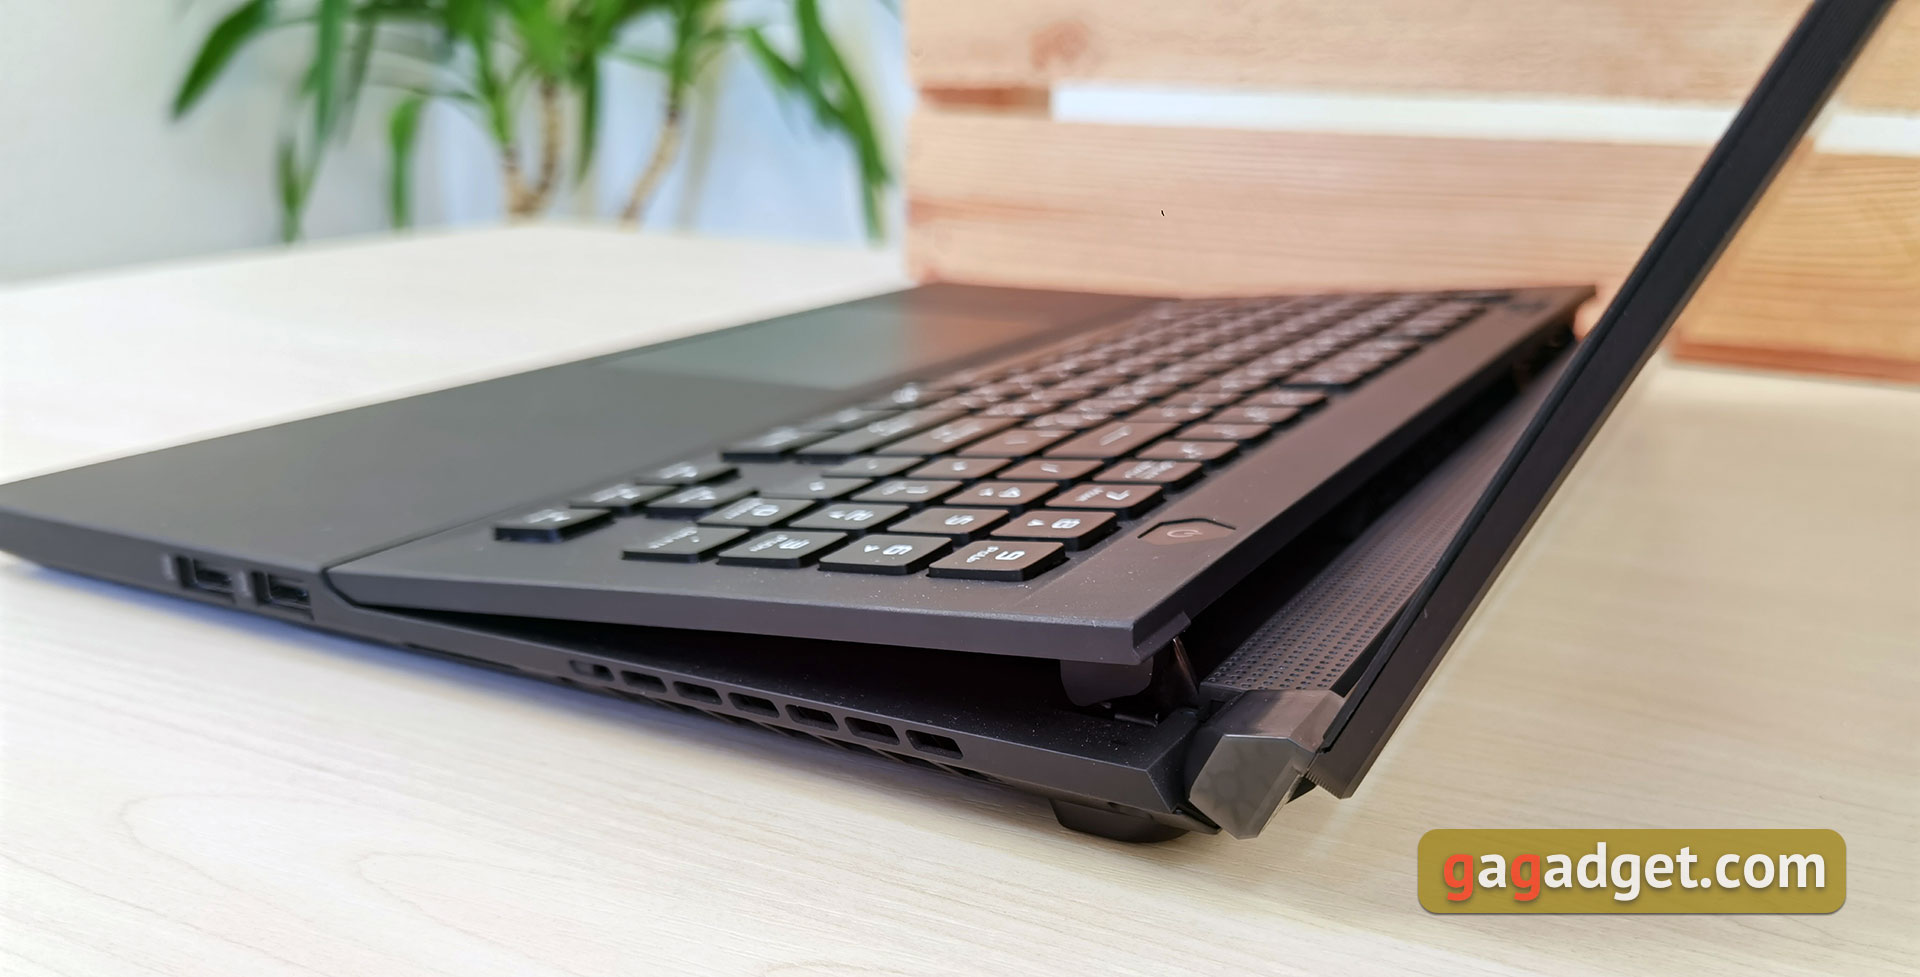 ASUS ROG Zephyrus S17 GX703 review: a gaming laptop for all your money-14